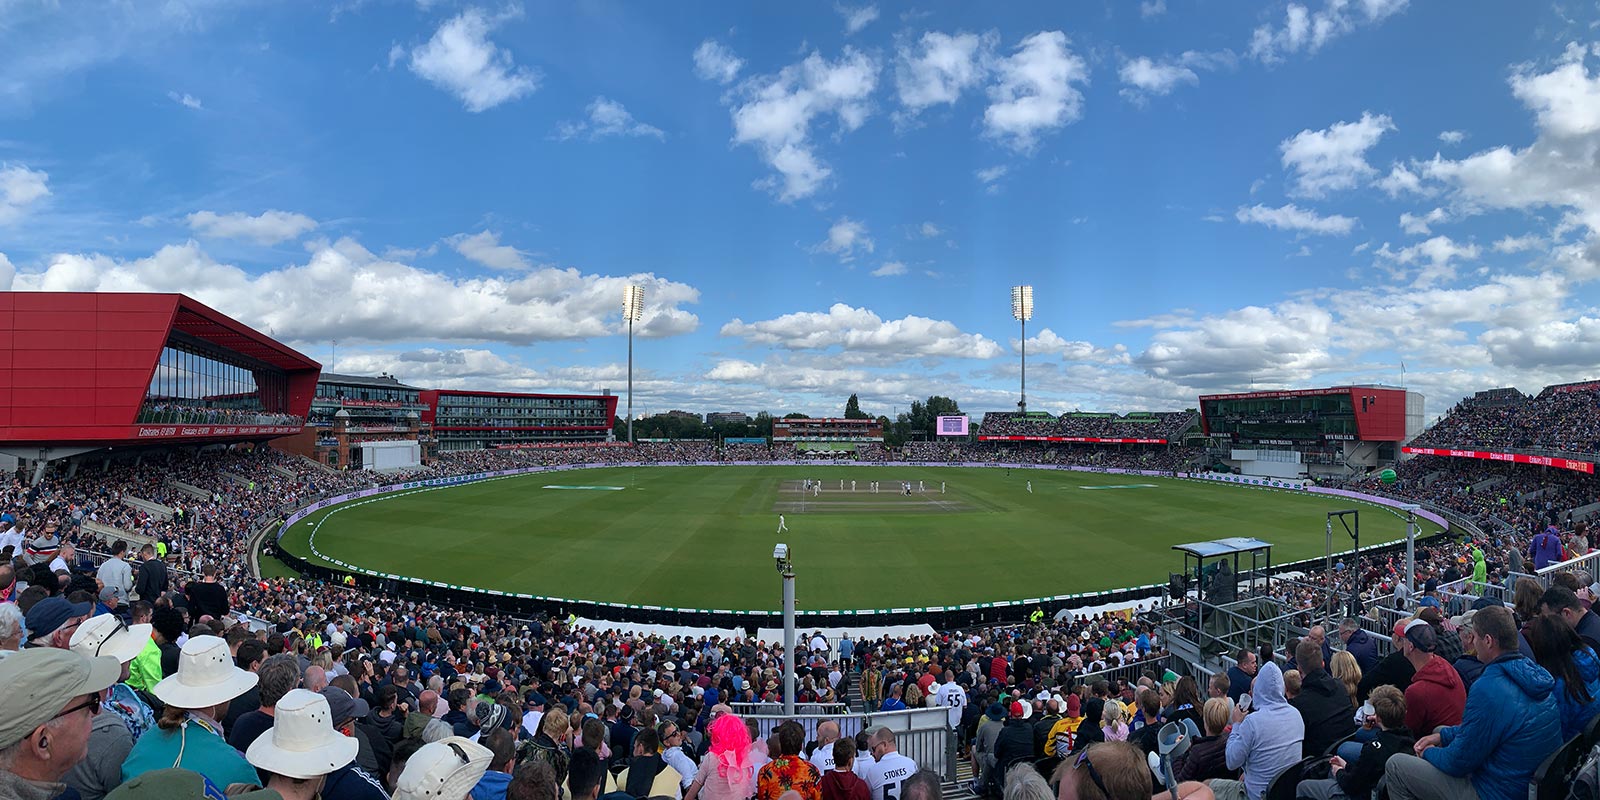 Old Trafford Cricket Ground in Trafford, England. The ashes, 2019